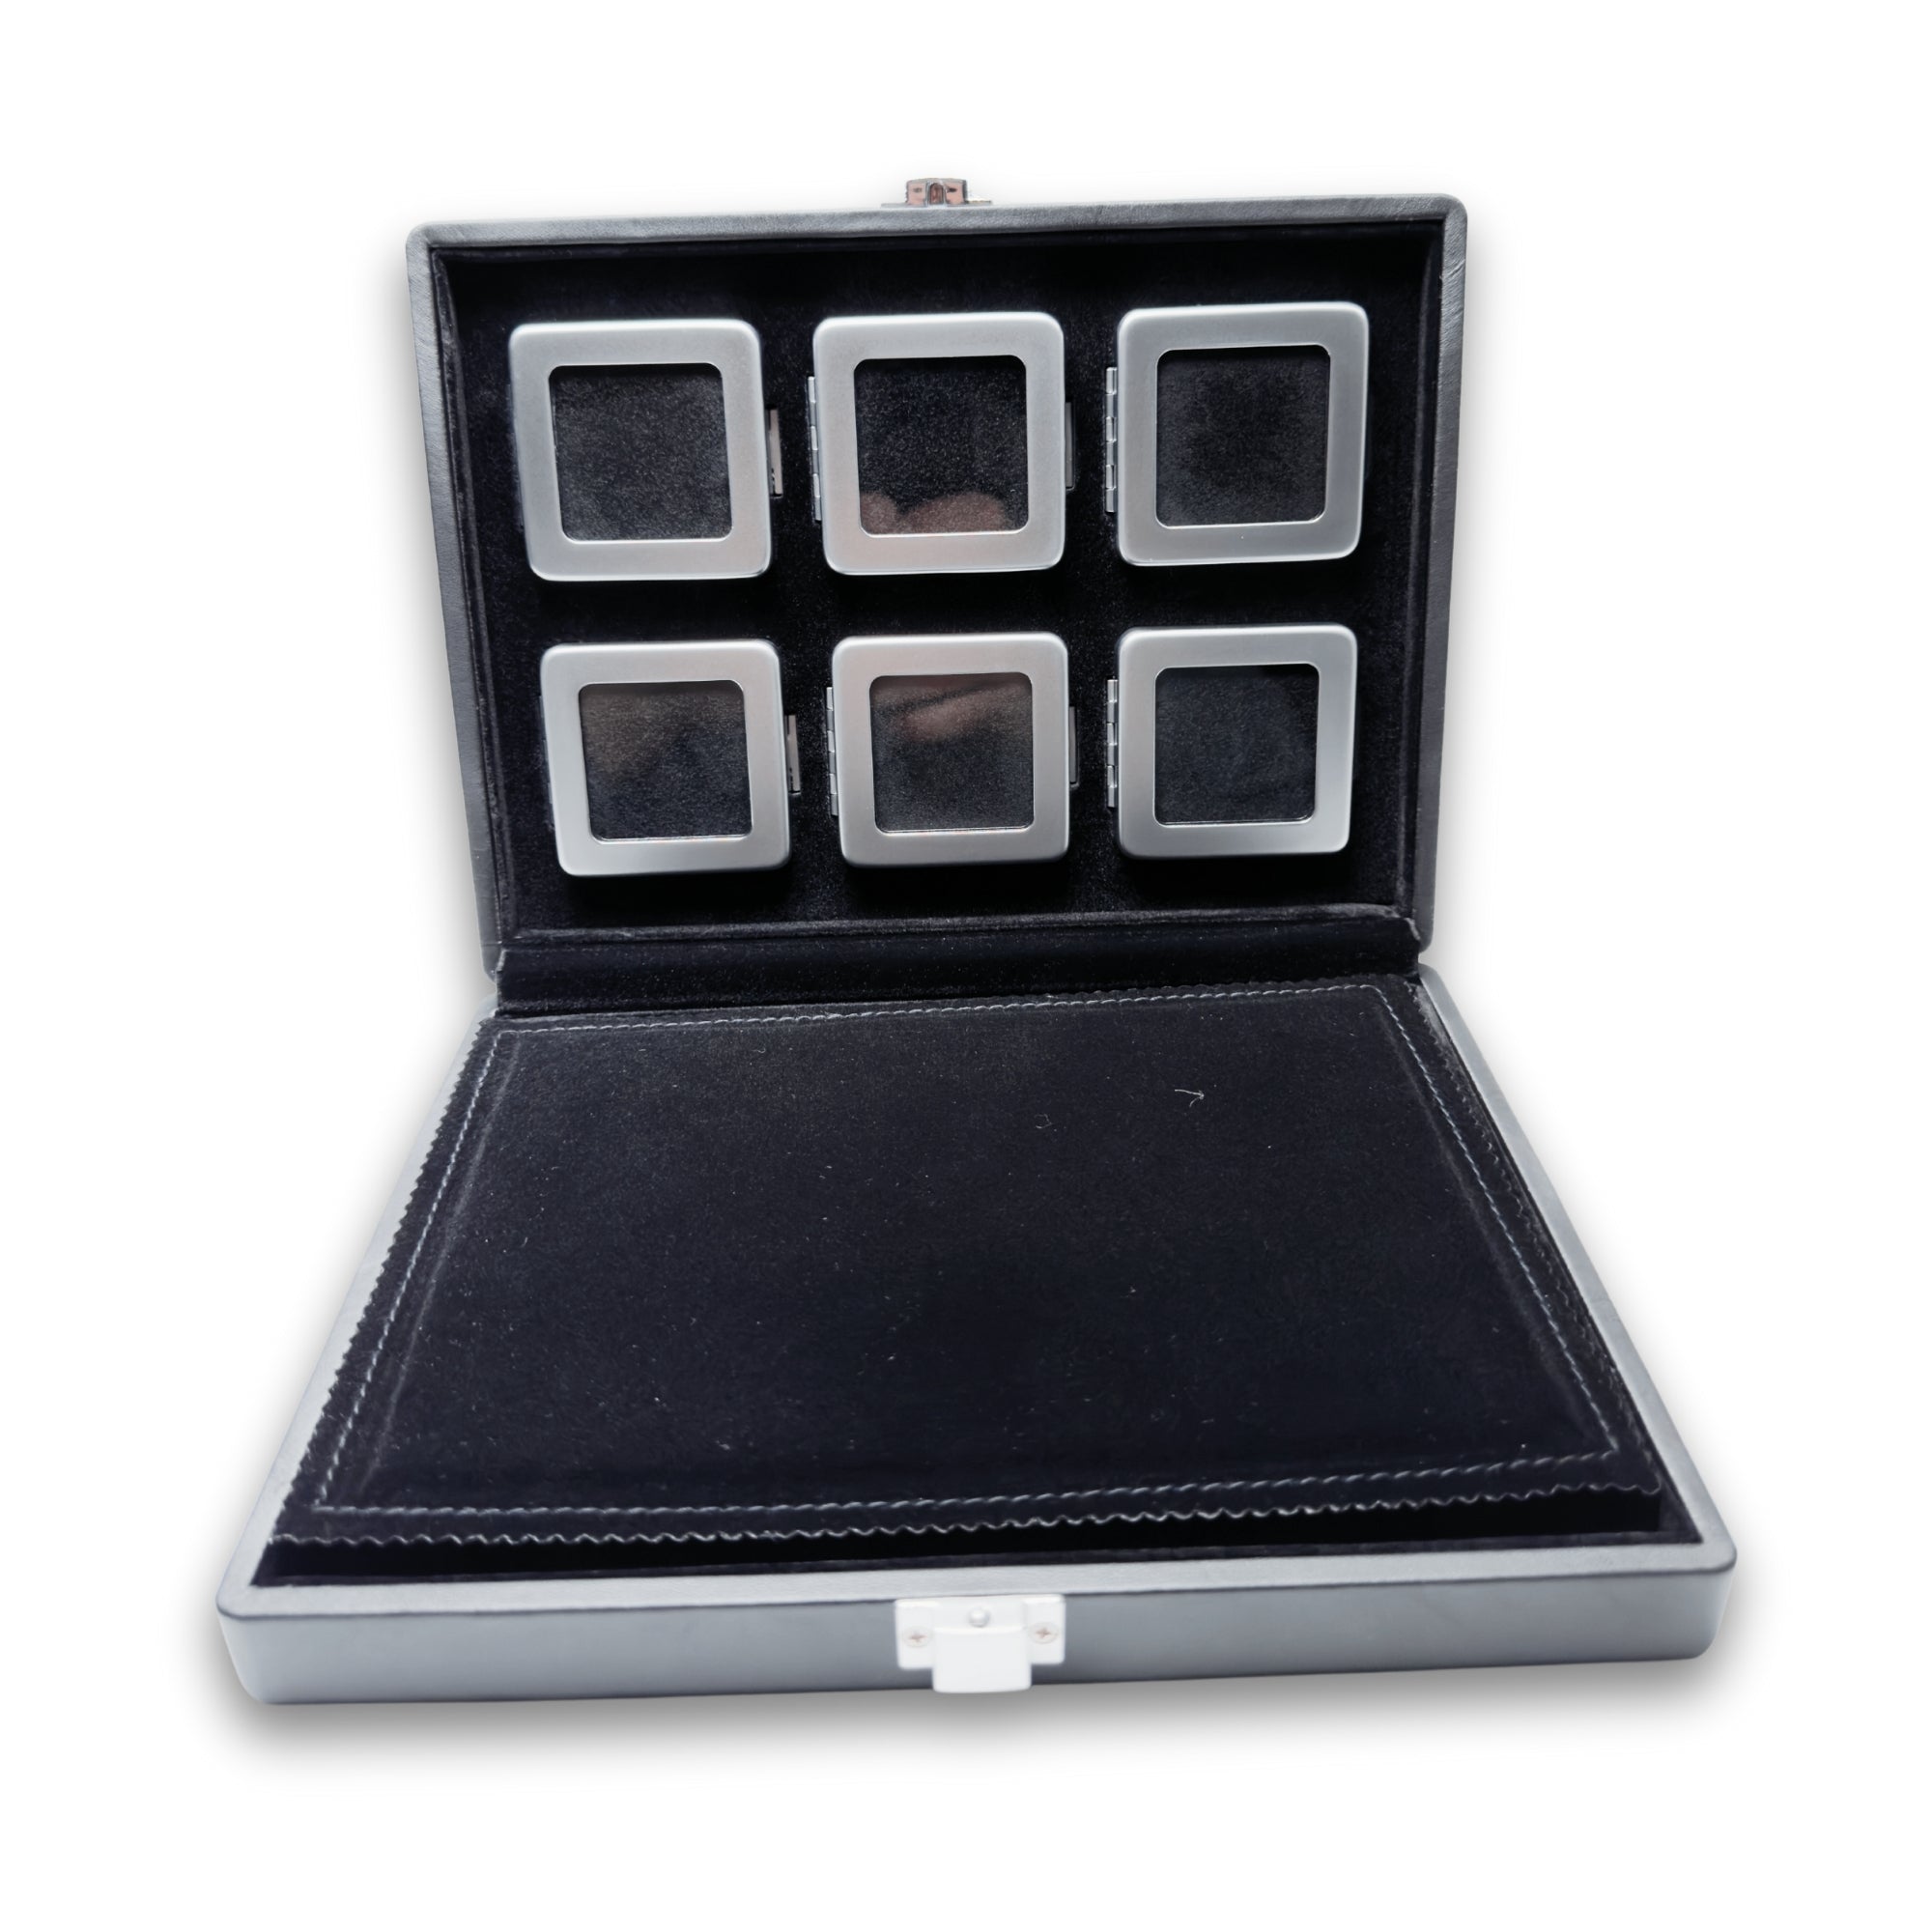 Luxury set of 12 boxes for precious stones in an elegant presentation case